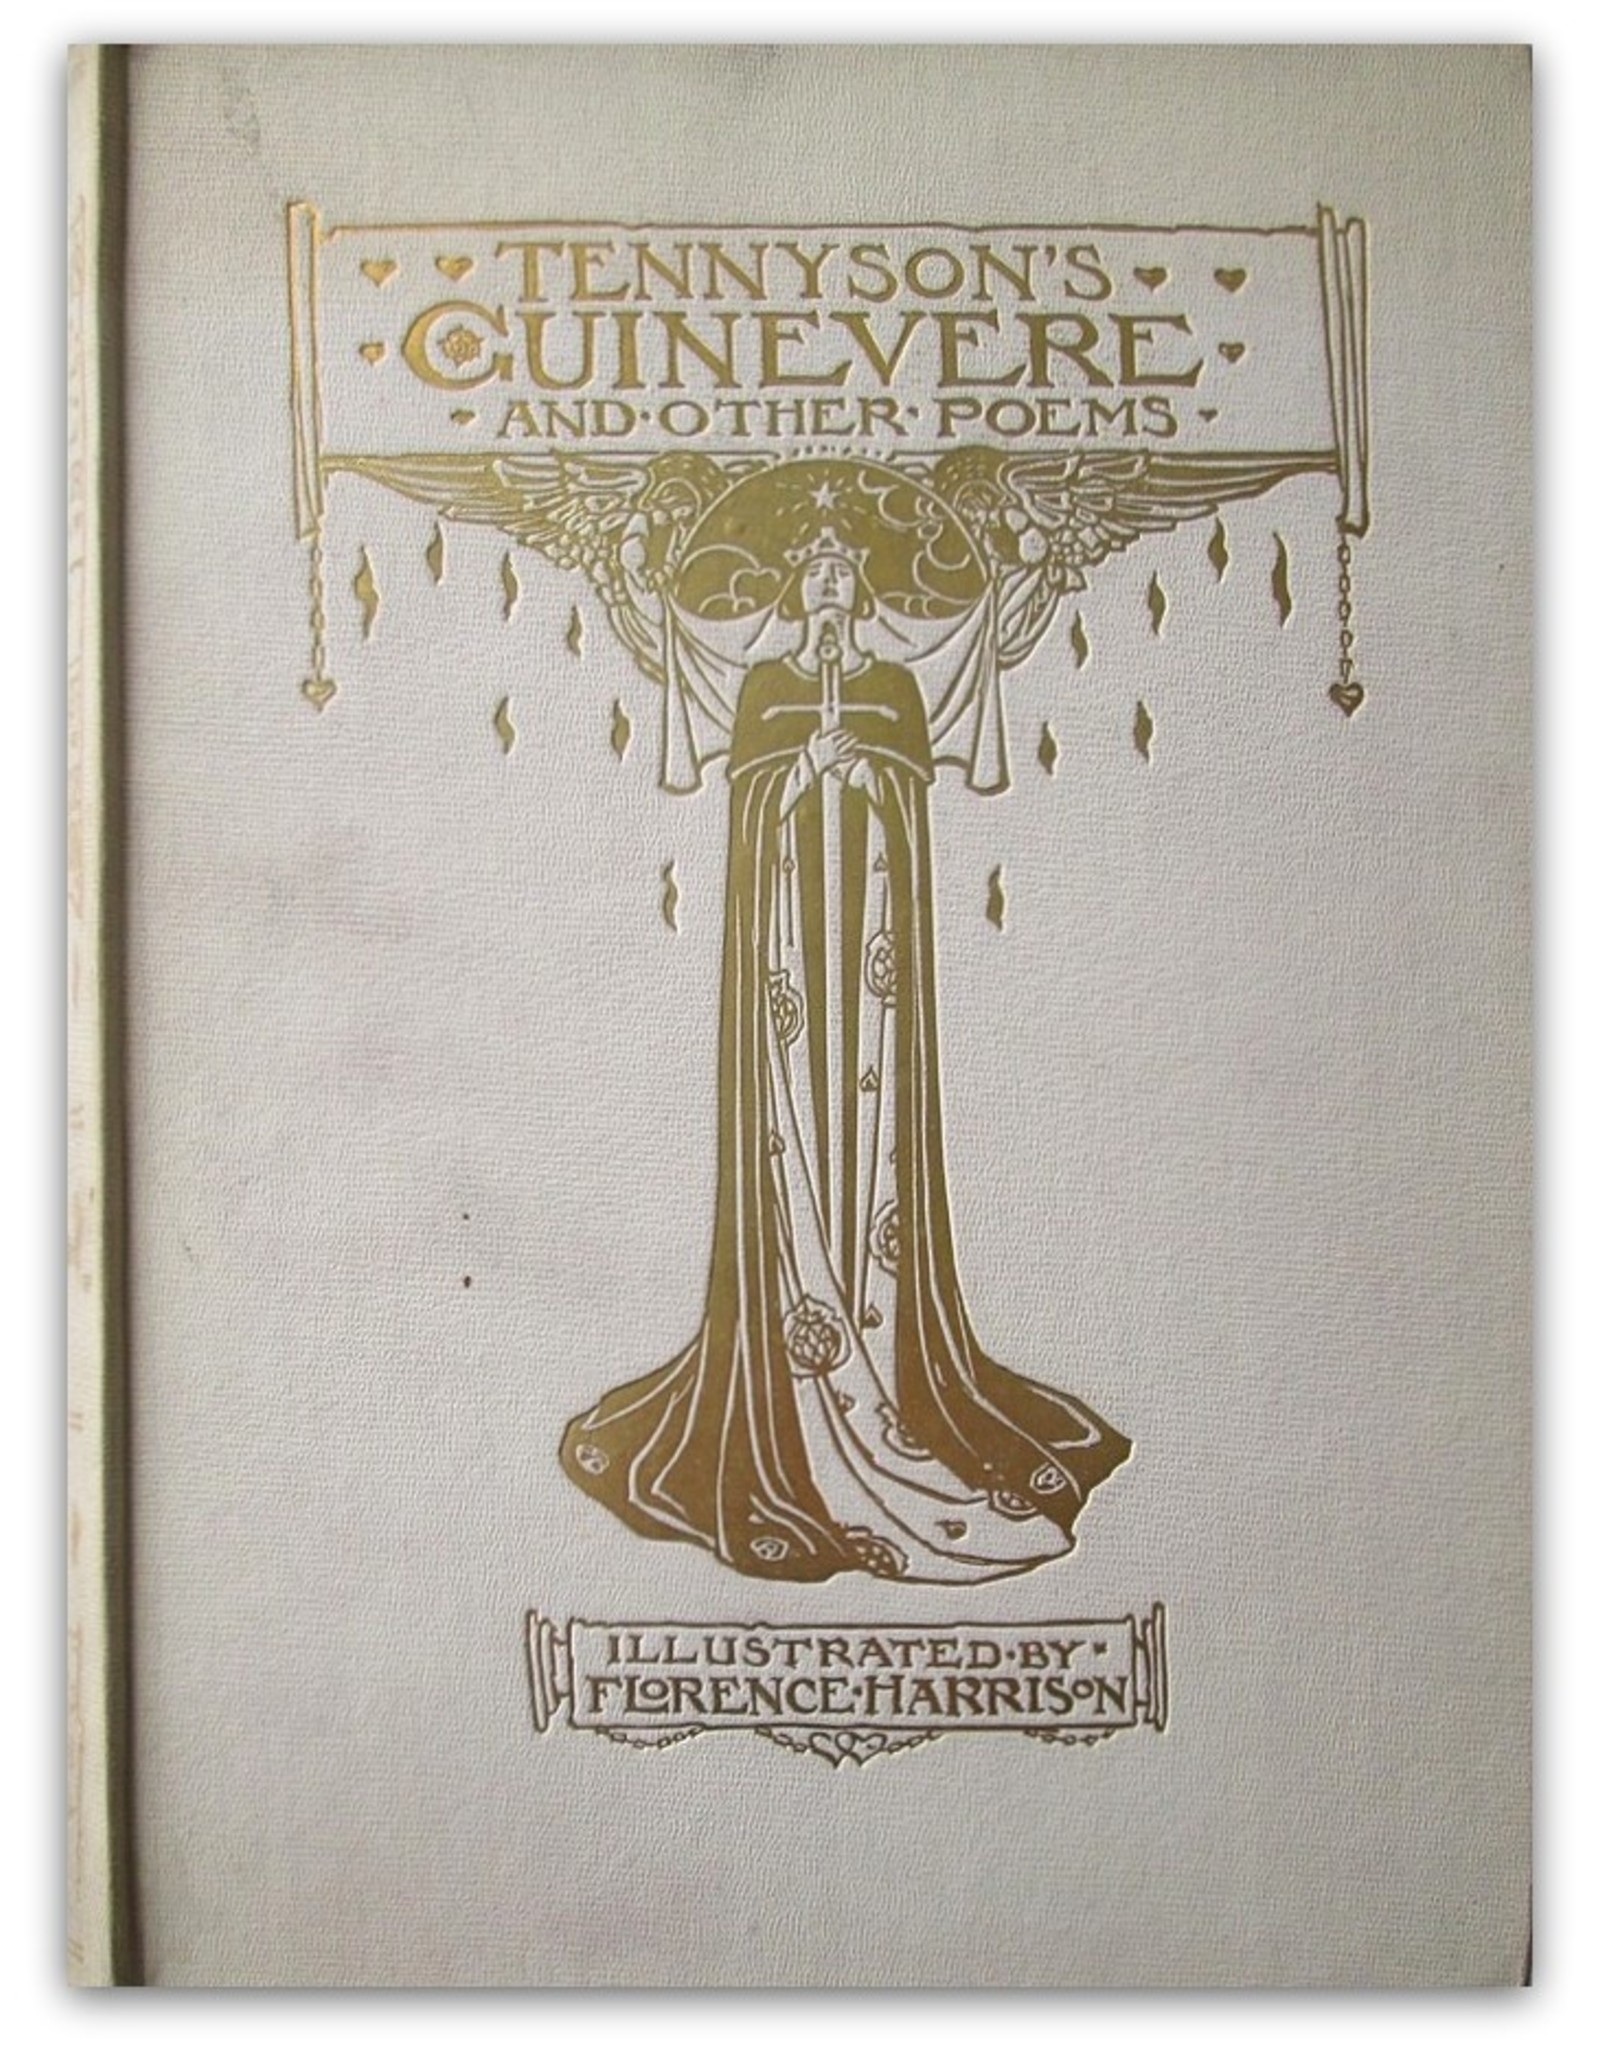 Alfred Lord Tennyson - Guinevere and Other Poems. Illustrated by Florence Harrison